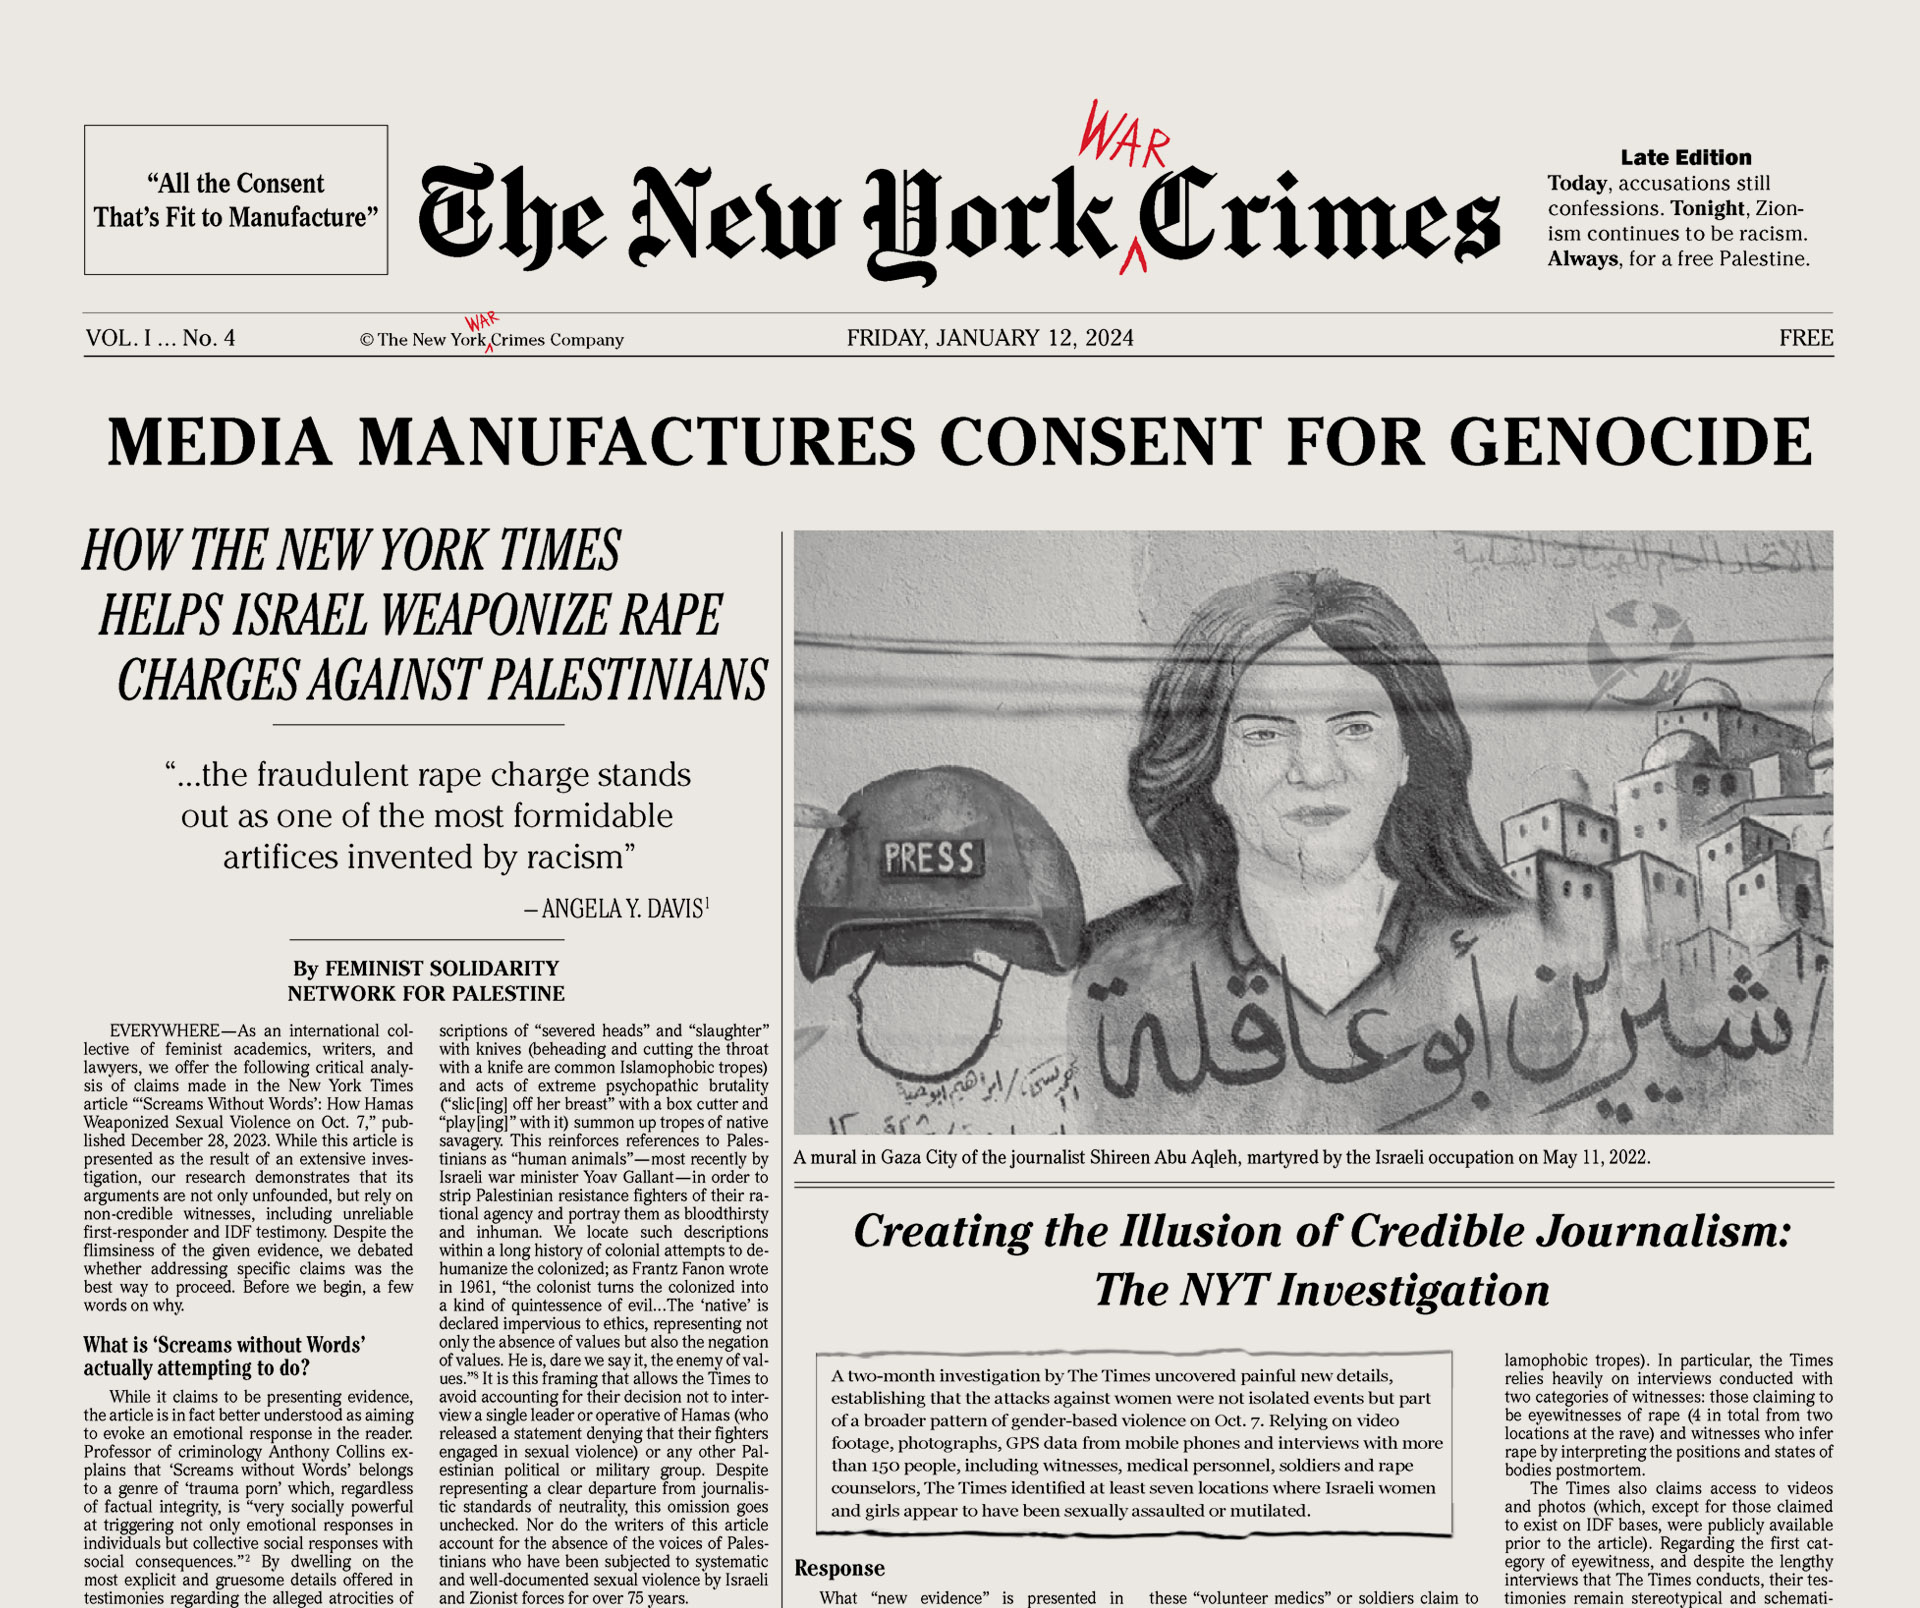 https://newyorkwarcrimes.com/media/pages/print-issue-vol-i-no-4-media-manufactures-consent-for-genocide/0616181ab0-1709308326/ny-crimes-04-cover.jpg